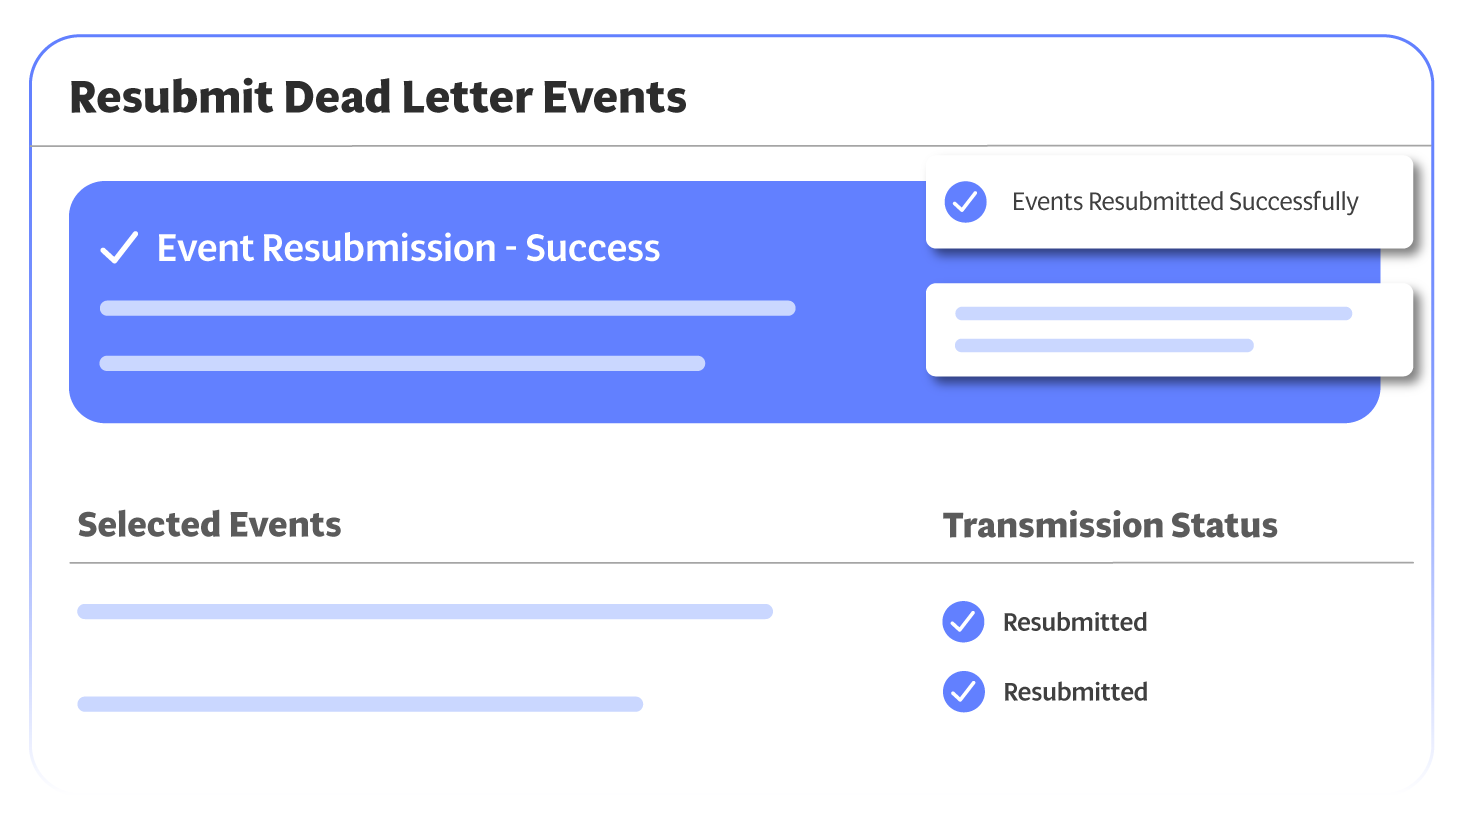 Resubmit Dead Letter events